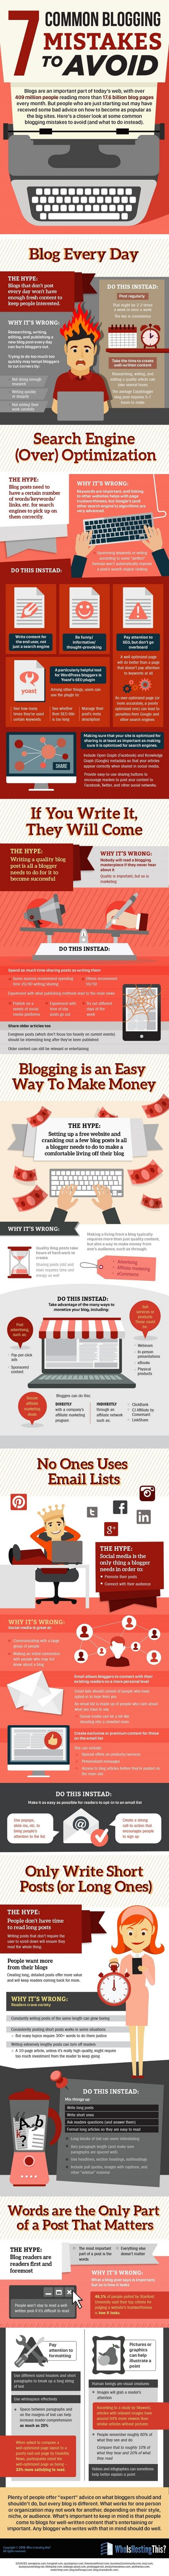 Seven Common Blogging Mistakes to Avoid [Infographic] - Profs | The MarTech Digest | Scoop.it